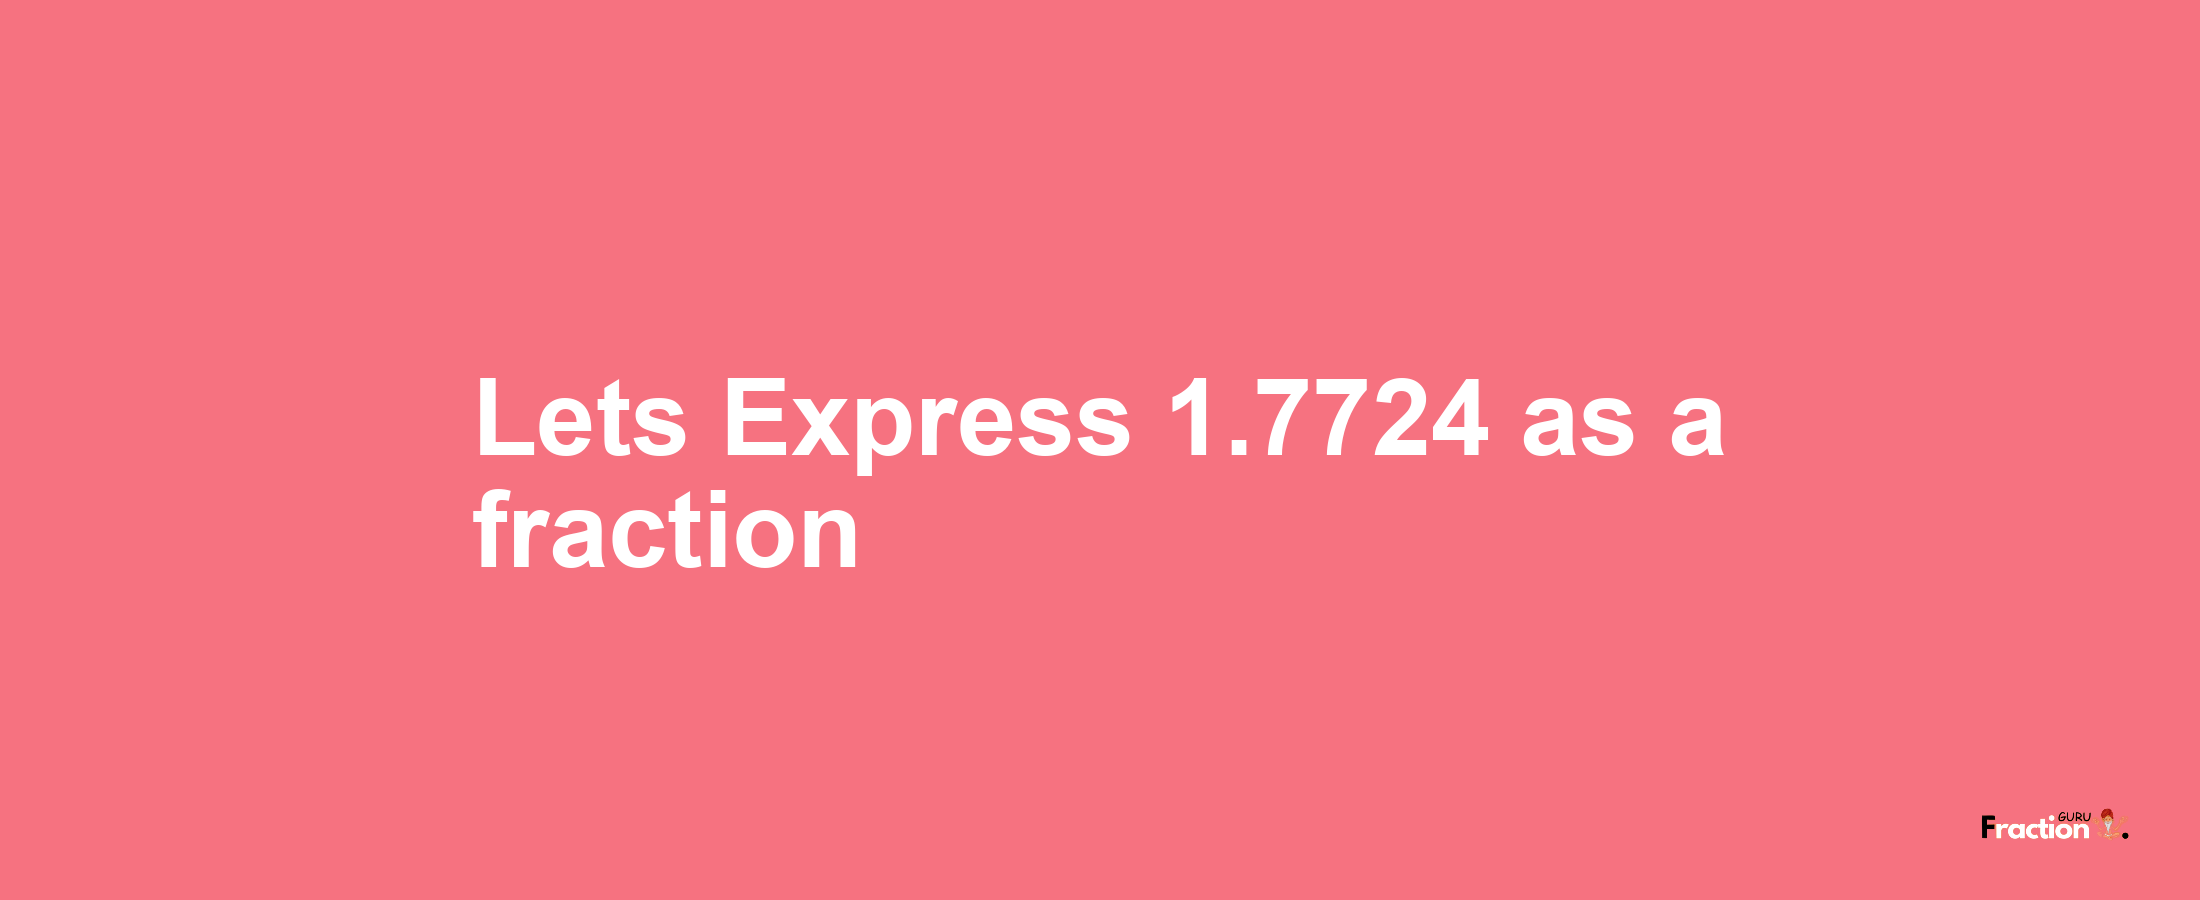 Lets Express 1.7724 as afraction